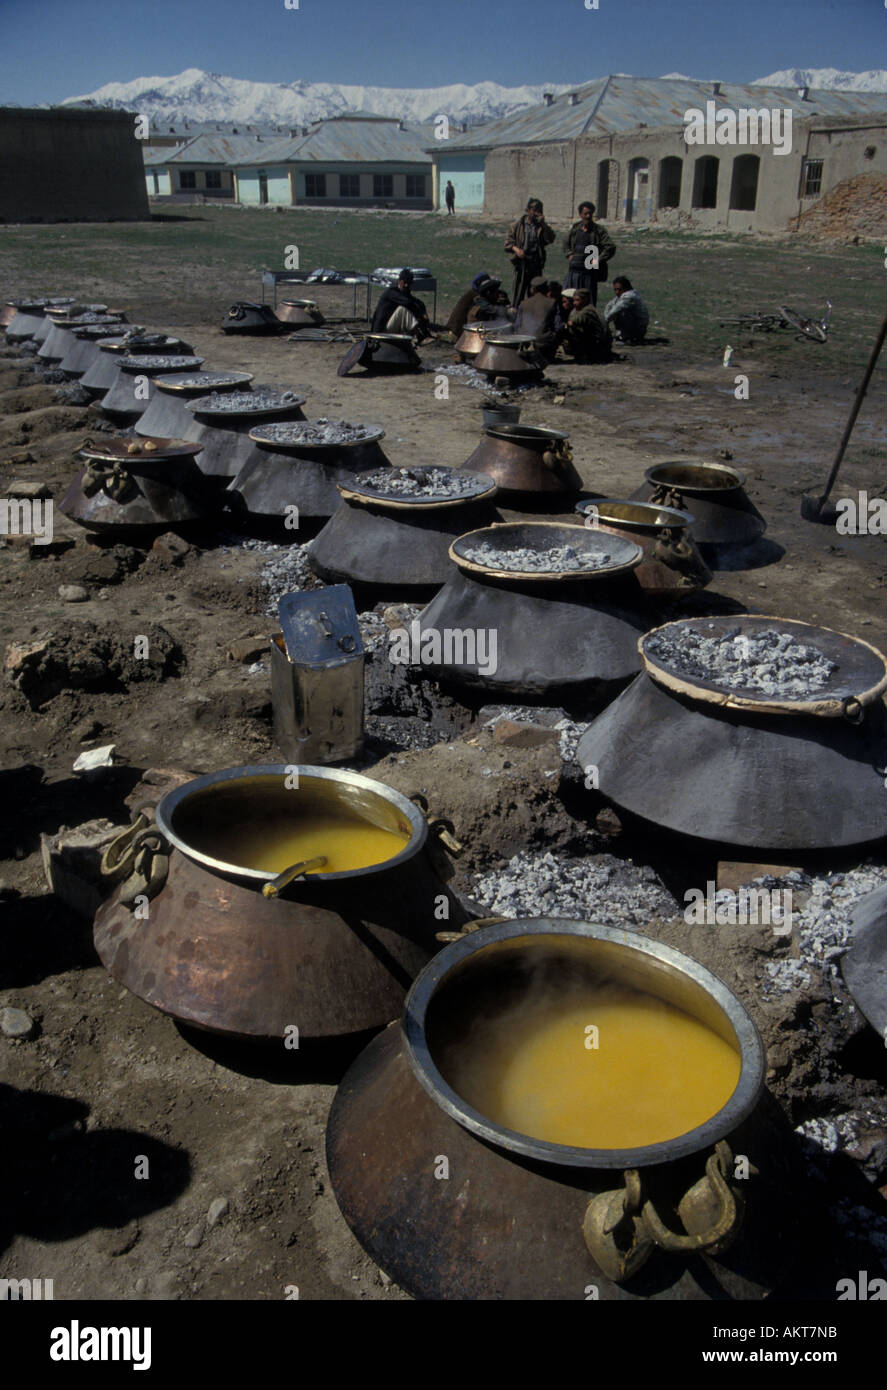 Afghan cooking pots outside feast Kabul Afghanistan Stock Photo